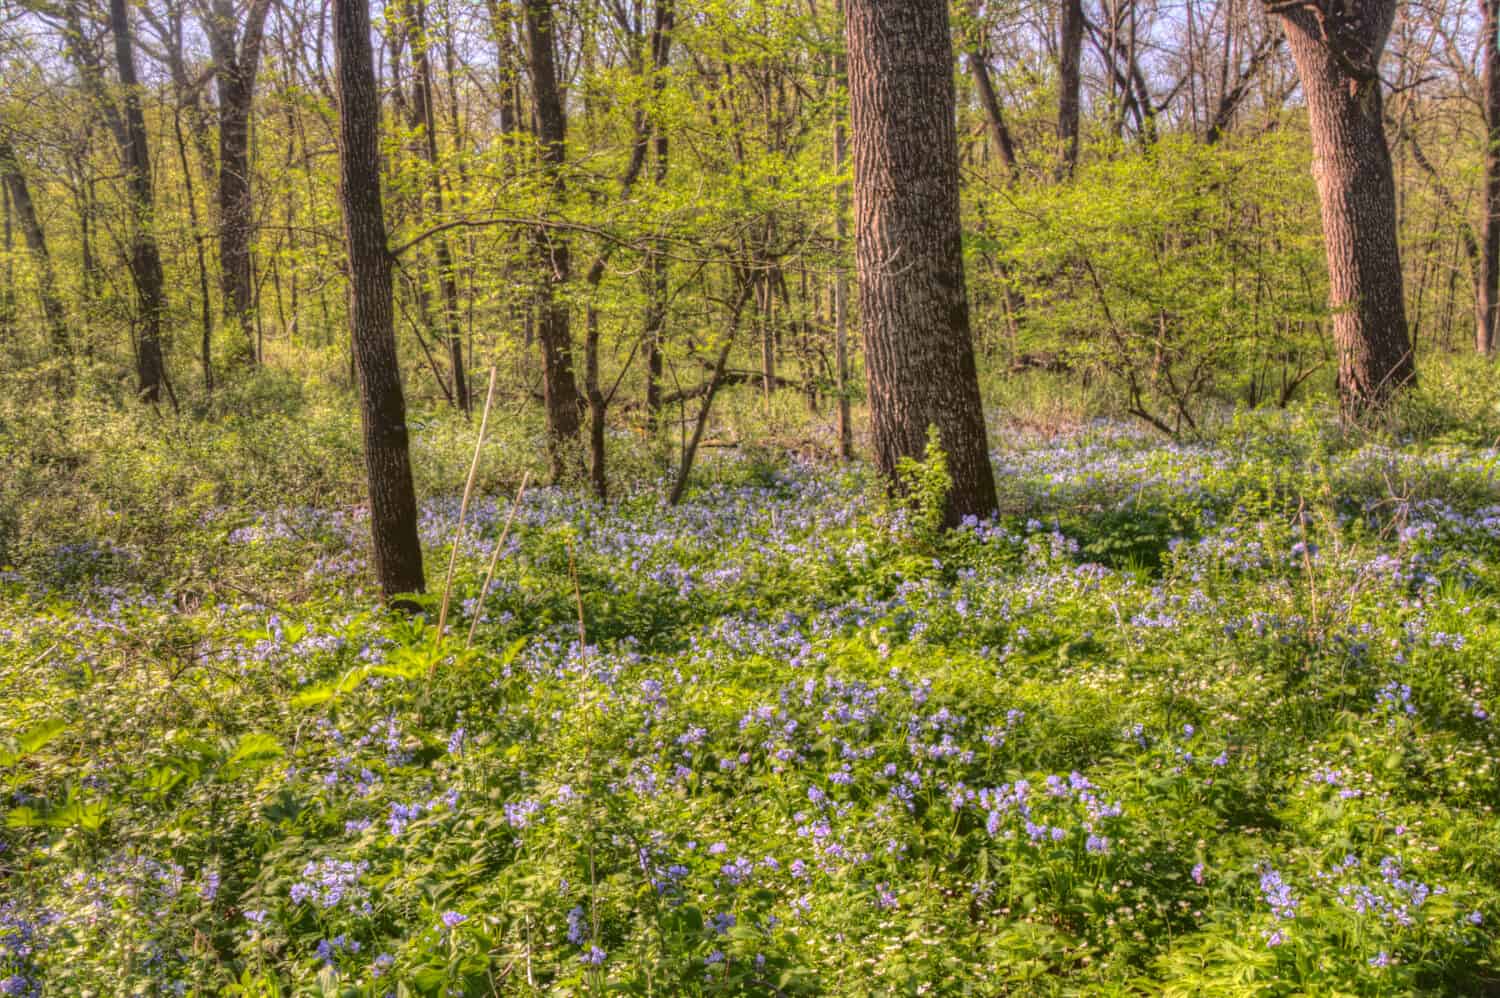 Carley State Park is a Rural area northwest of Rochester, Minnesota with Bluebells in late Spring